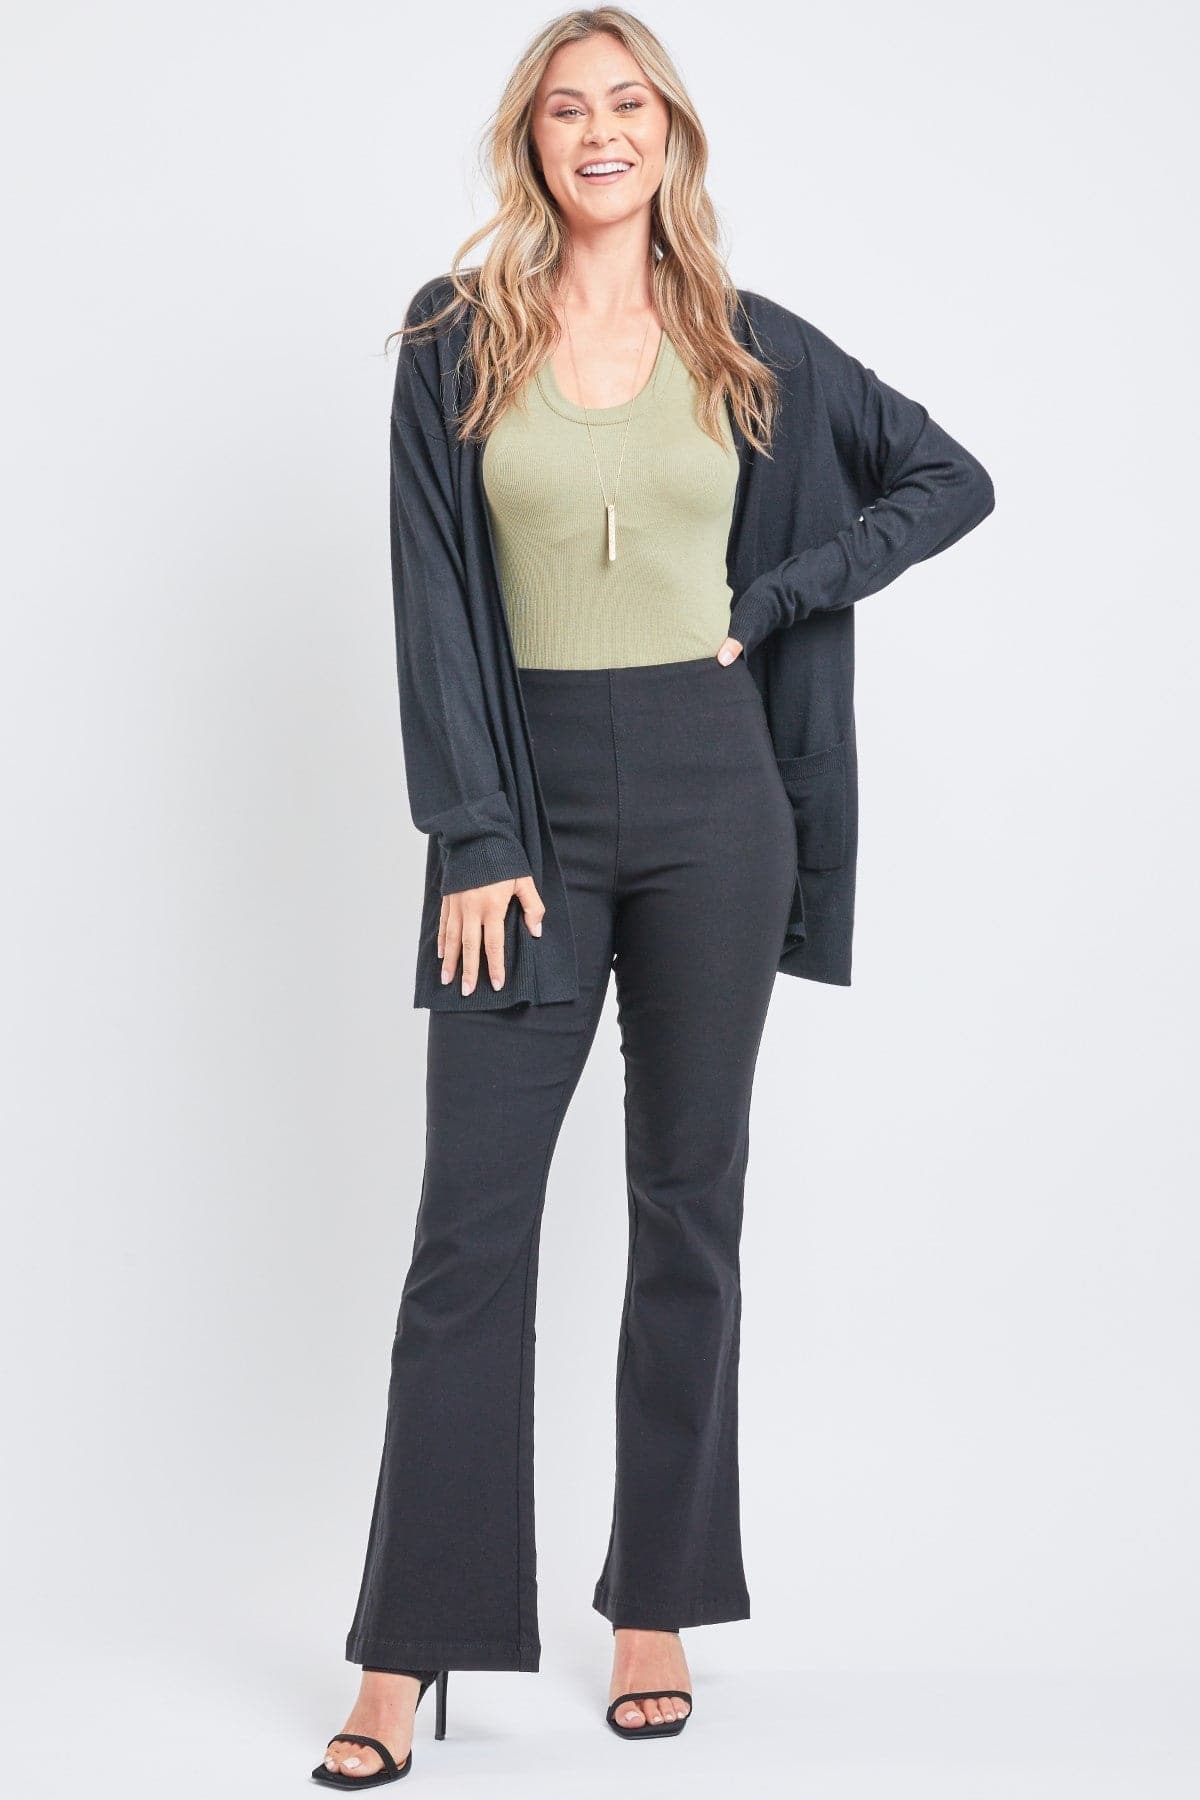 Women's Pull-On Comfort Stretch Bootcut Pant